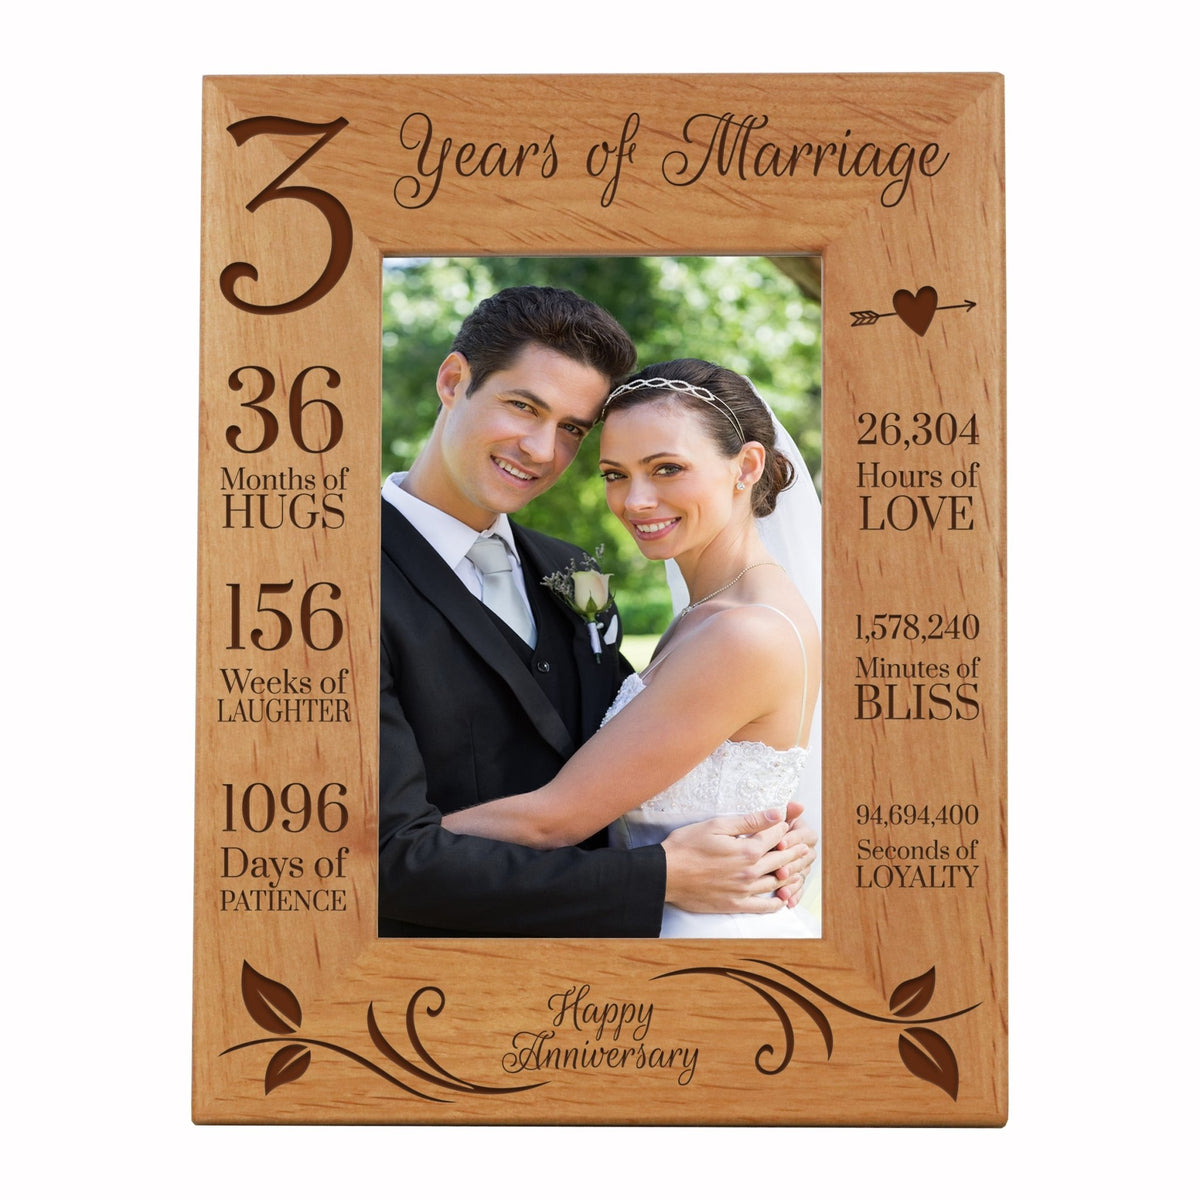 Engraved 3rd Anniversary Photo Frame - 7.5 x 9.5 - LifeSong Milestones